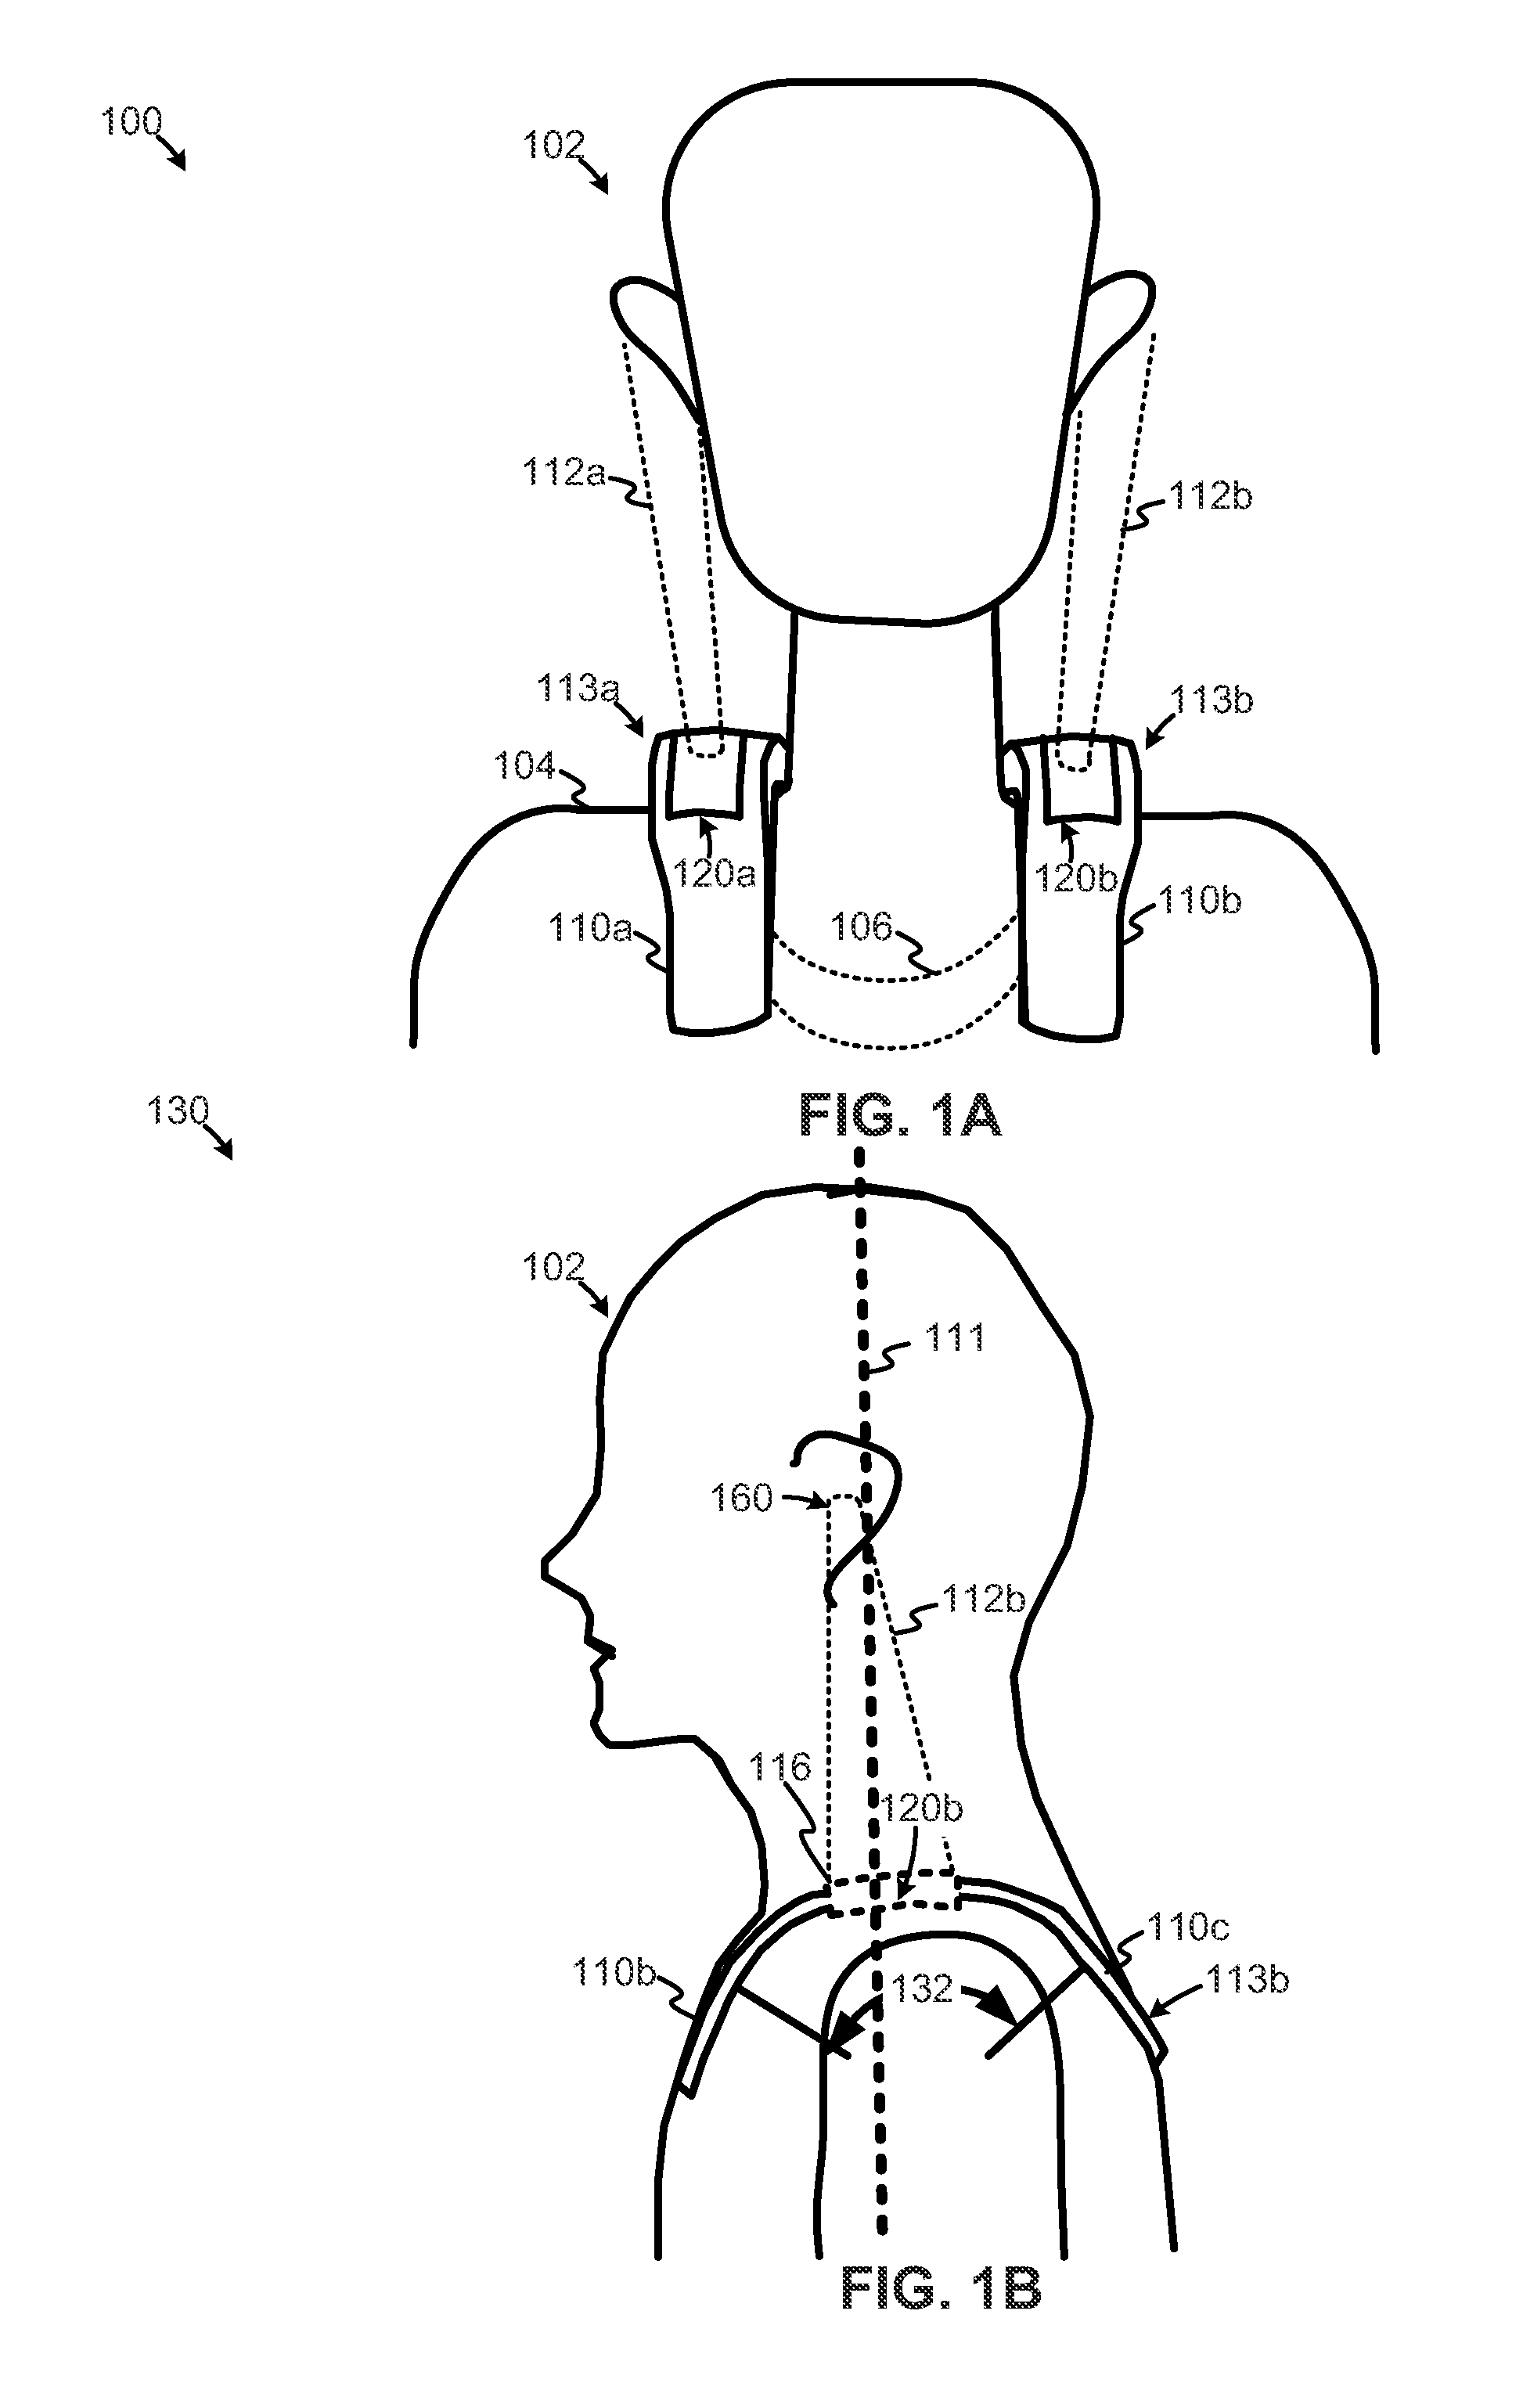 Non-occluded personal audio and communication system